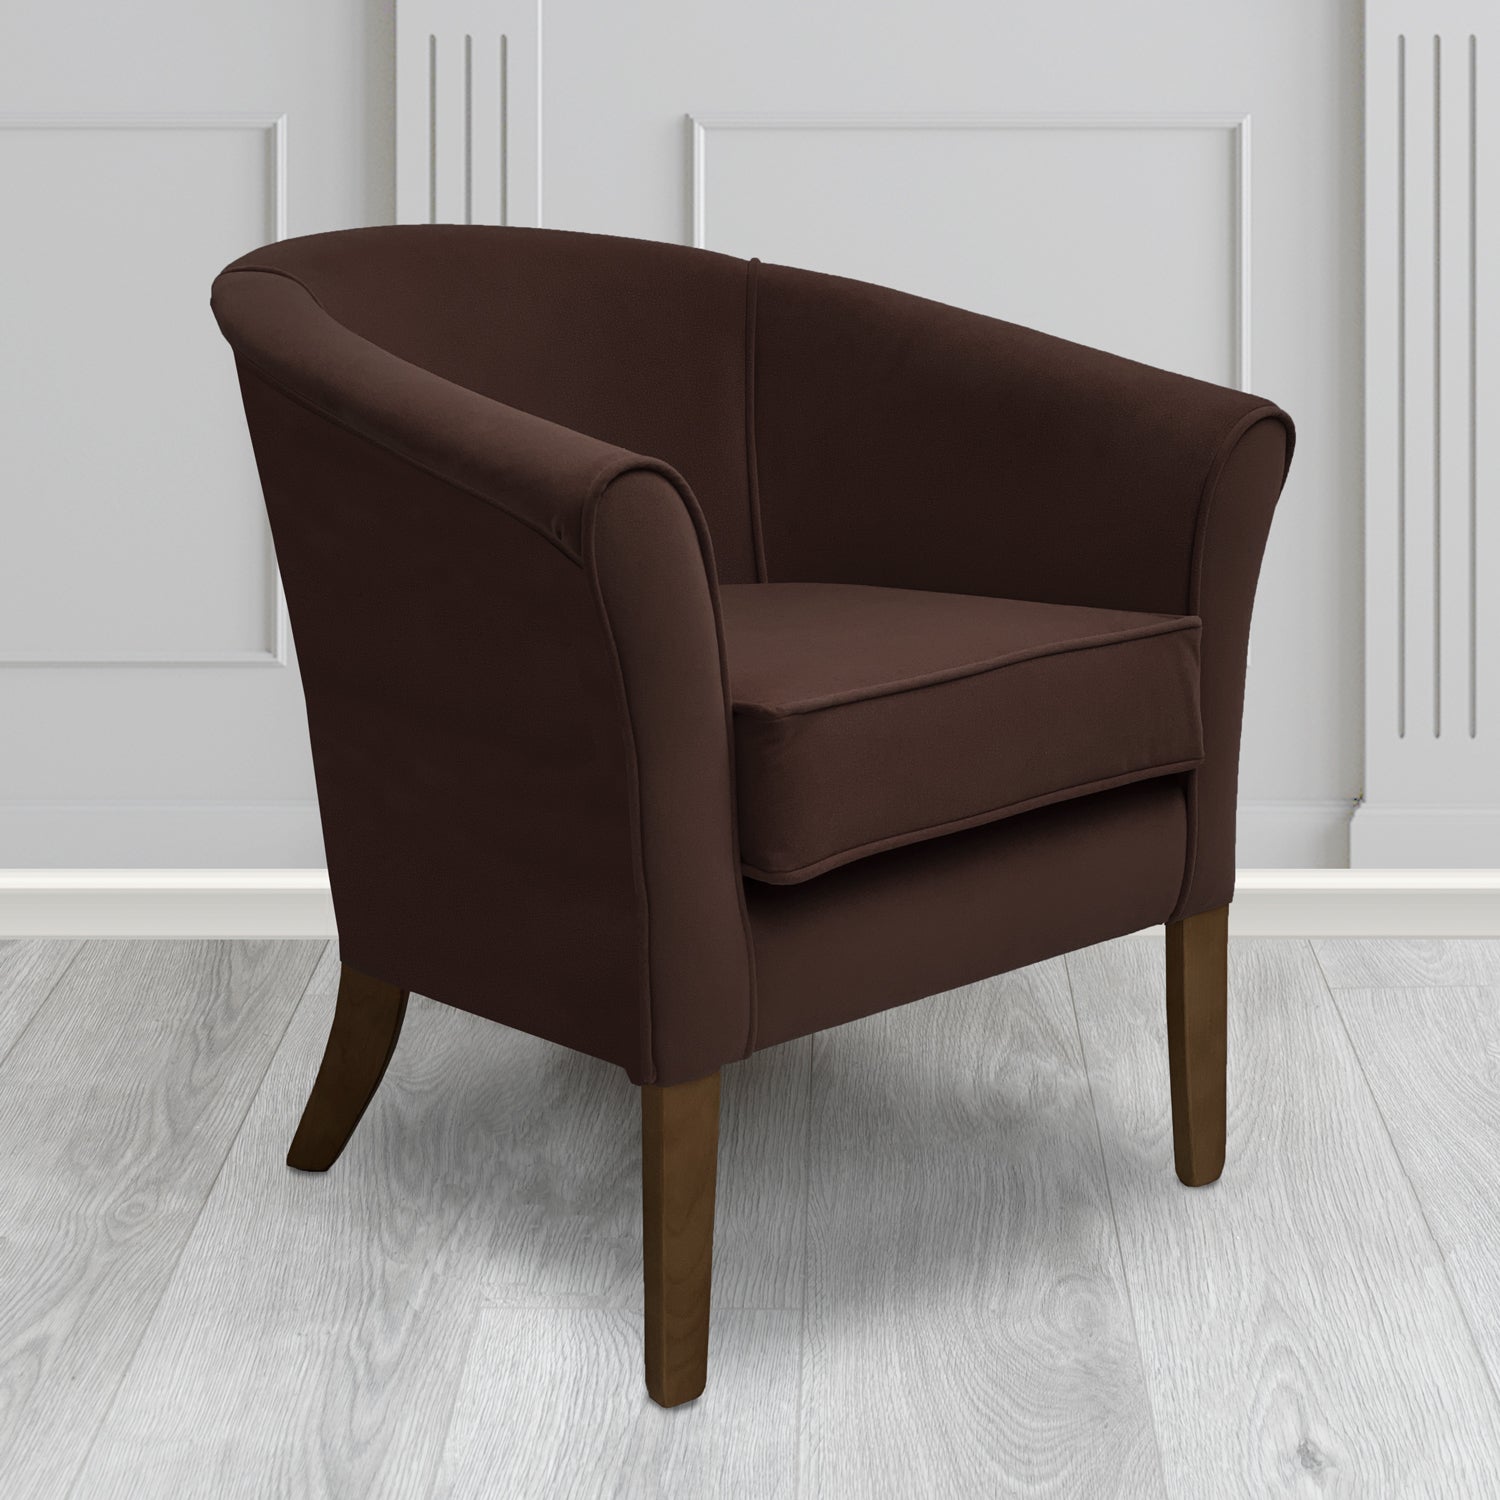 Aspen Tub Chair in Noble 702 Chocolate Crib 5 Velvet Fabric - Water Resistant - The Tub Chair Shop